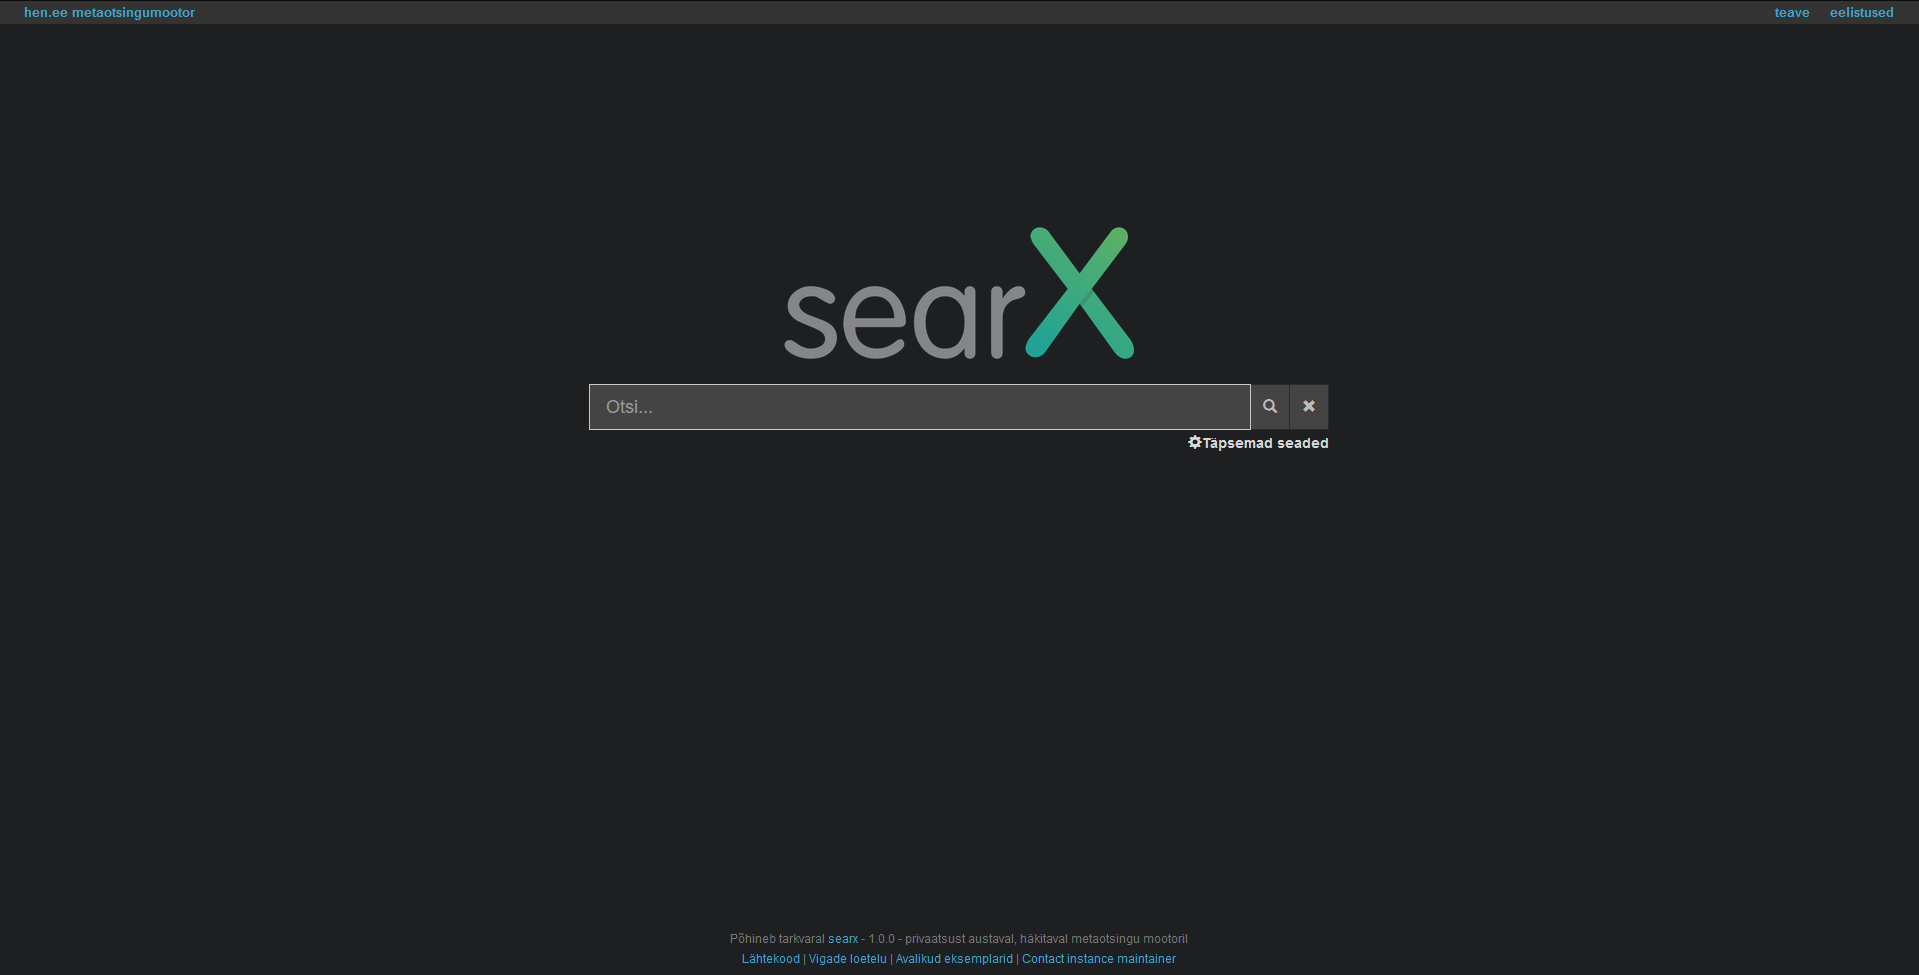 Picture of Searx's homepage